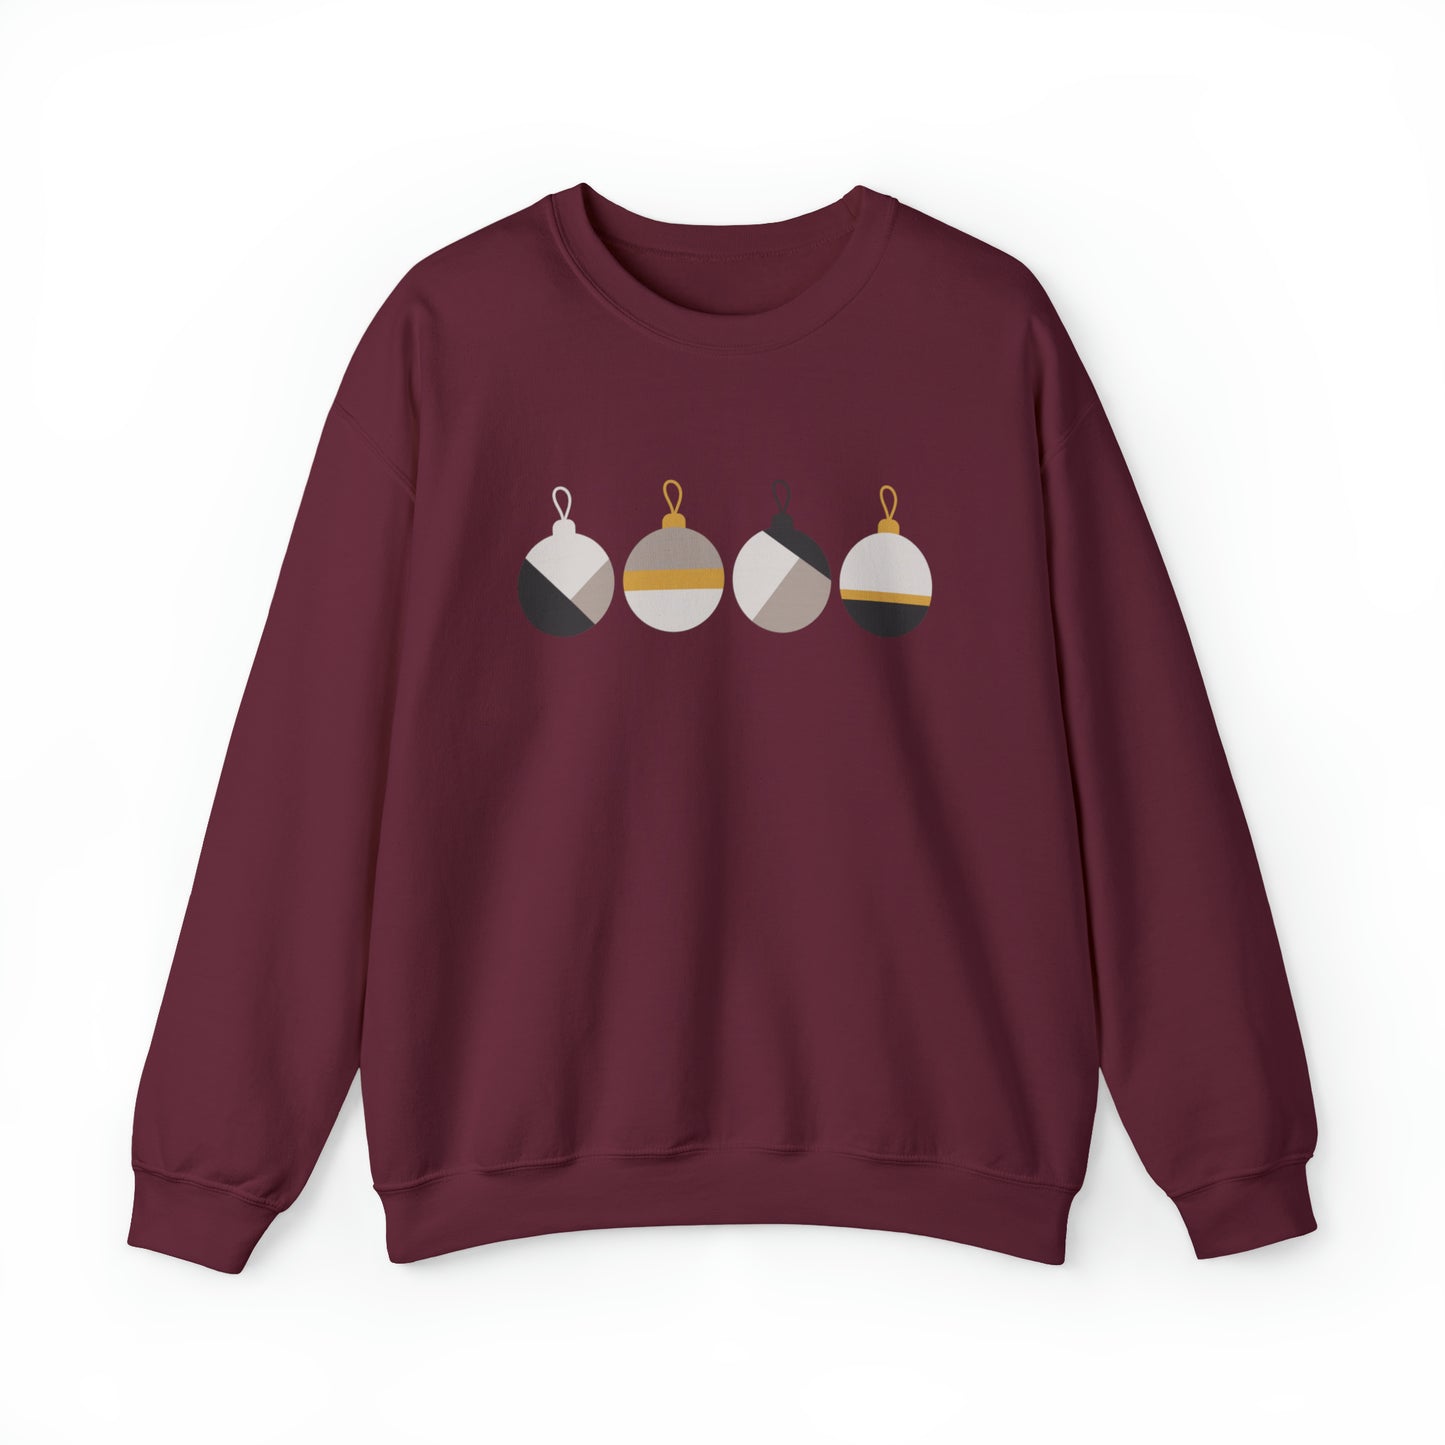 Merry Christmas Sweatshirt with Simple Bulb Ornaments